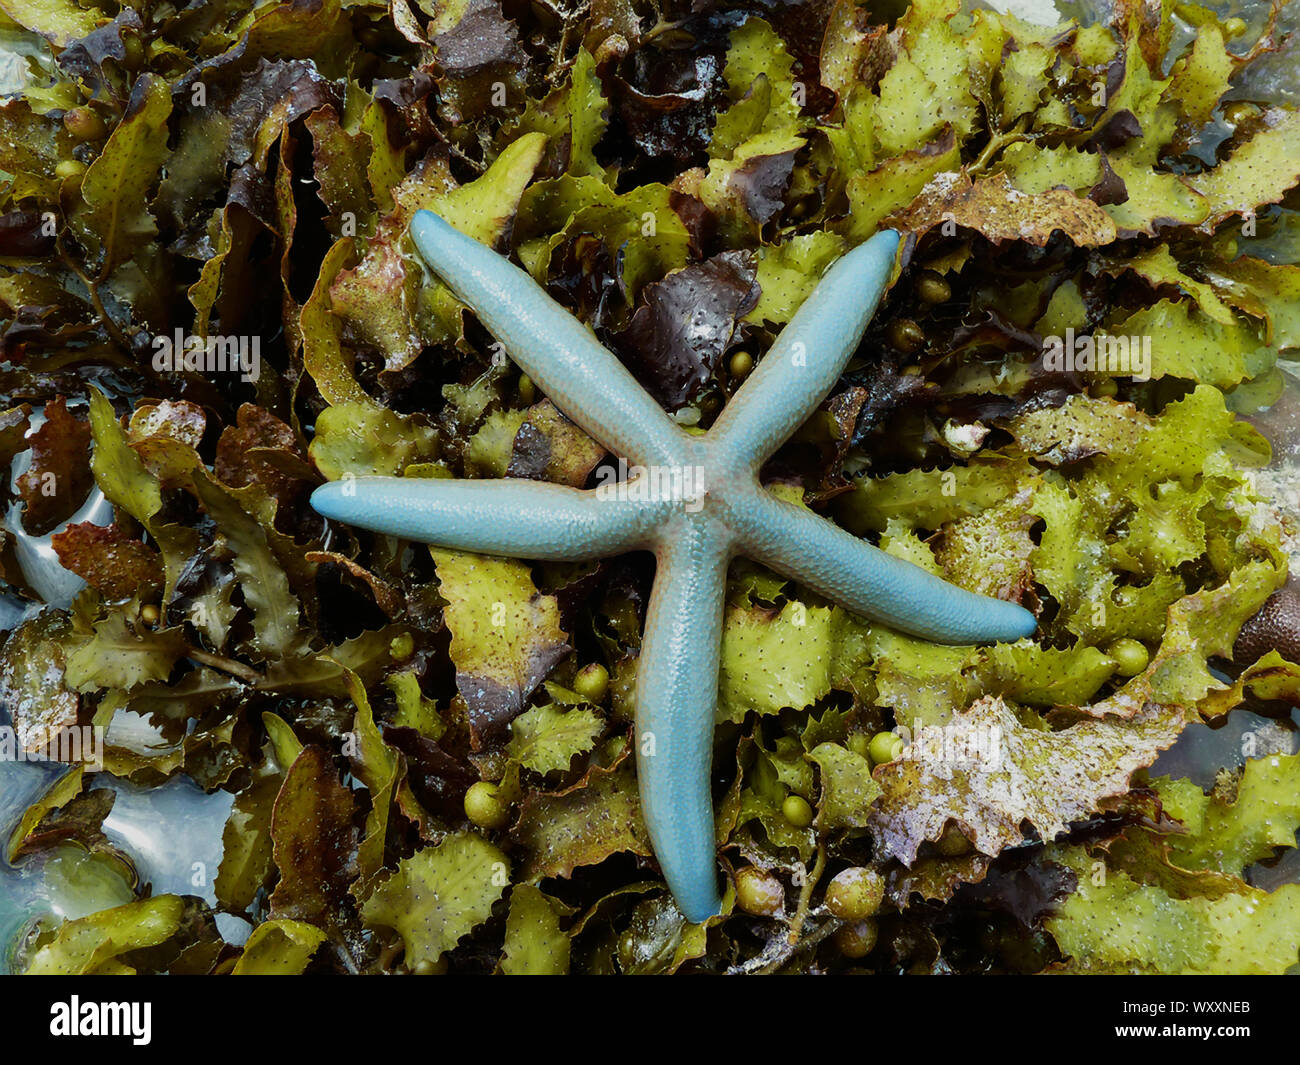 The Pale Linckia Starfish or Sea Star is a colour morph of the more common Blue Linckia Starfish. They are common in the tidal rockpools and shallow r Stock Photo